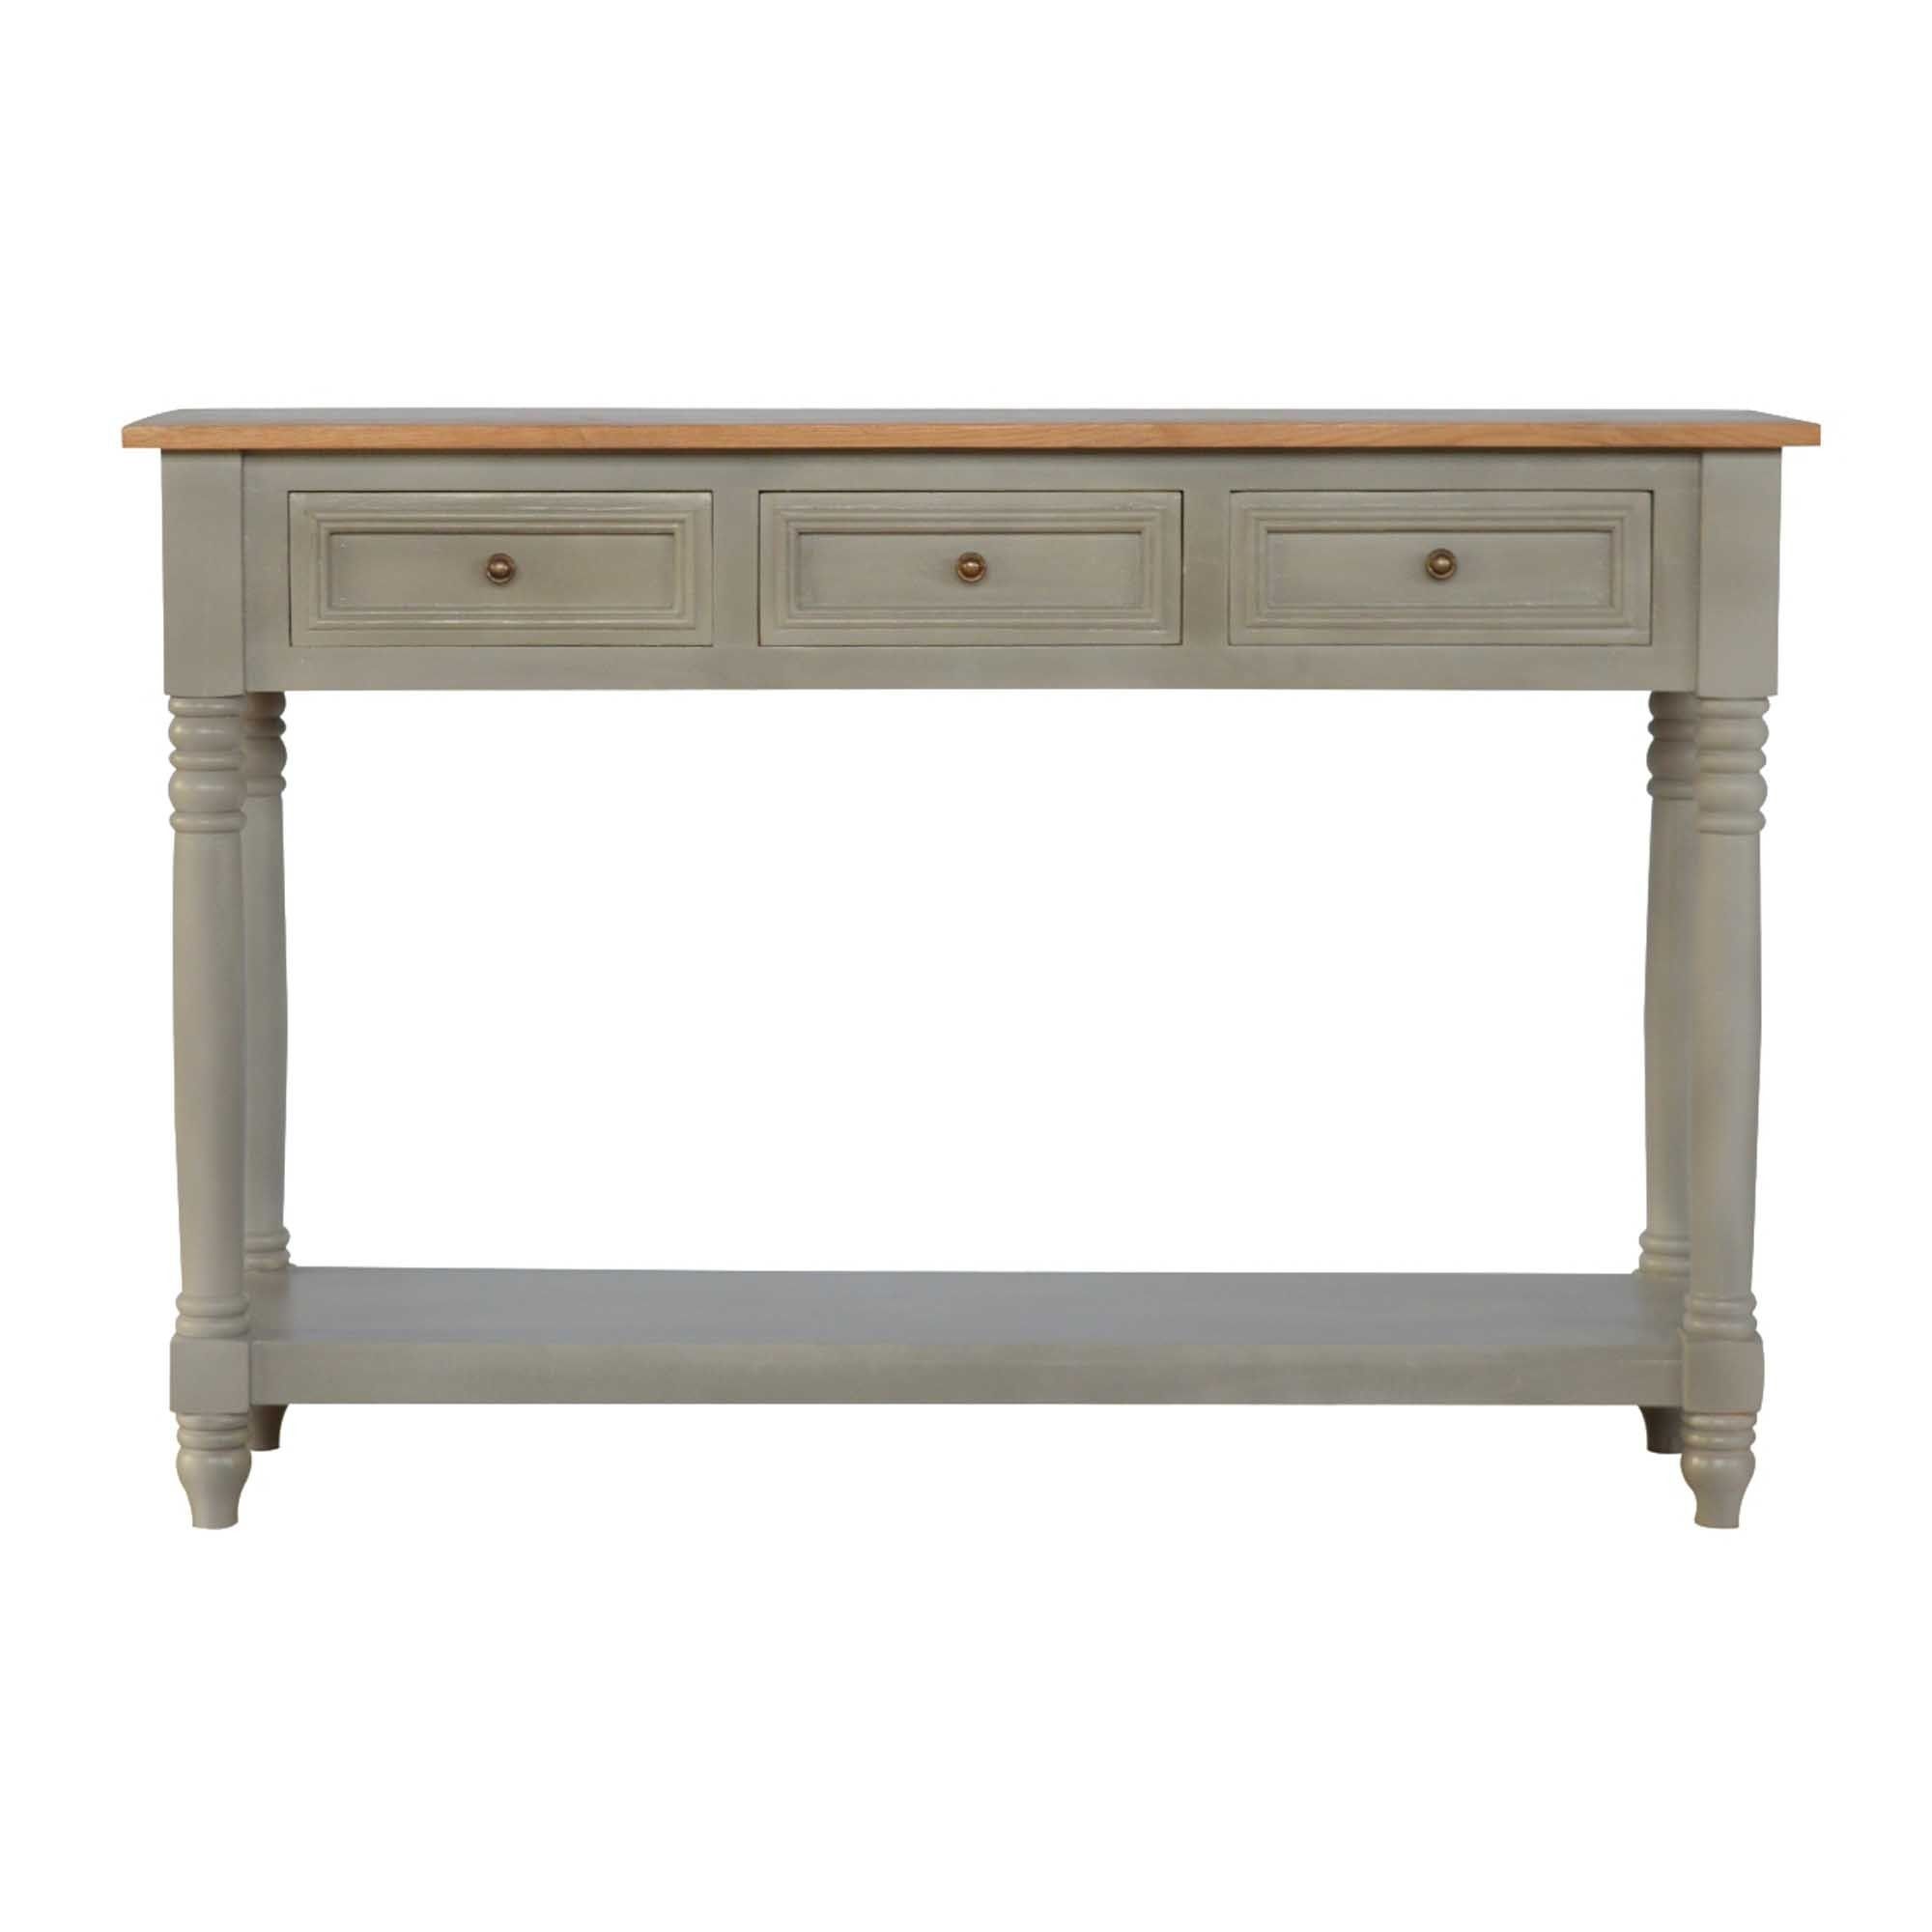 Grey Painted Console Table With Turned Legs | Lounge | Console Tables Pertaining To Smoke Gray Wood Console Tables (View 7 of 20)